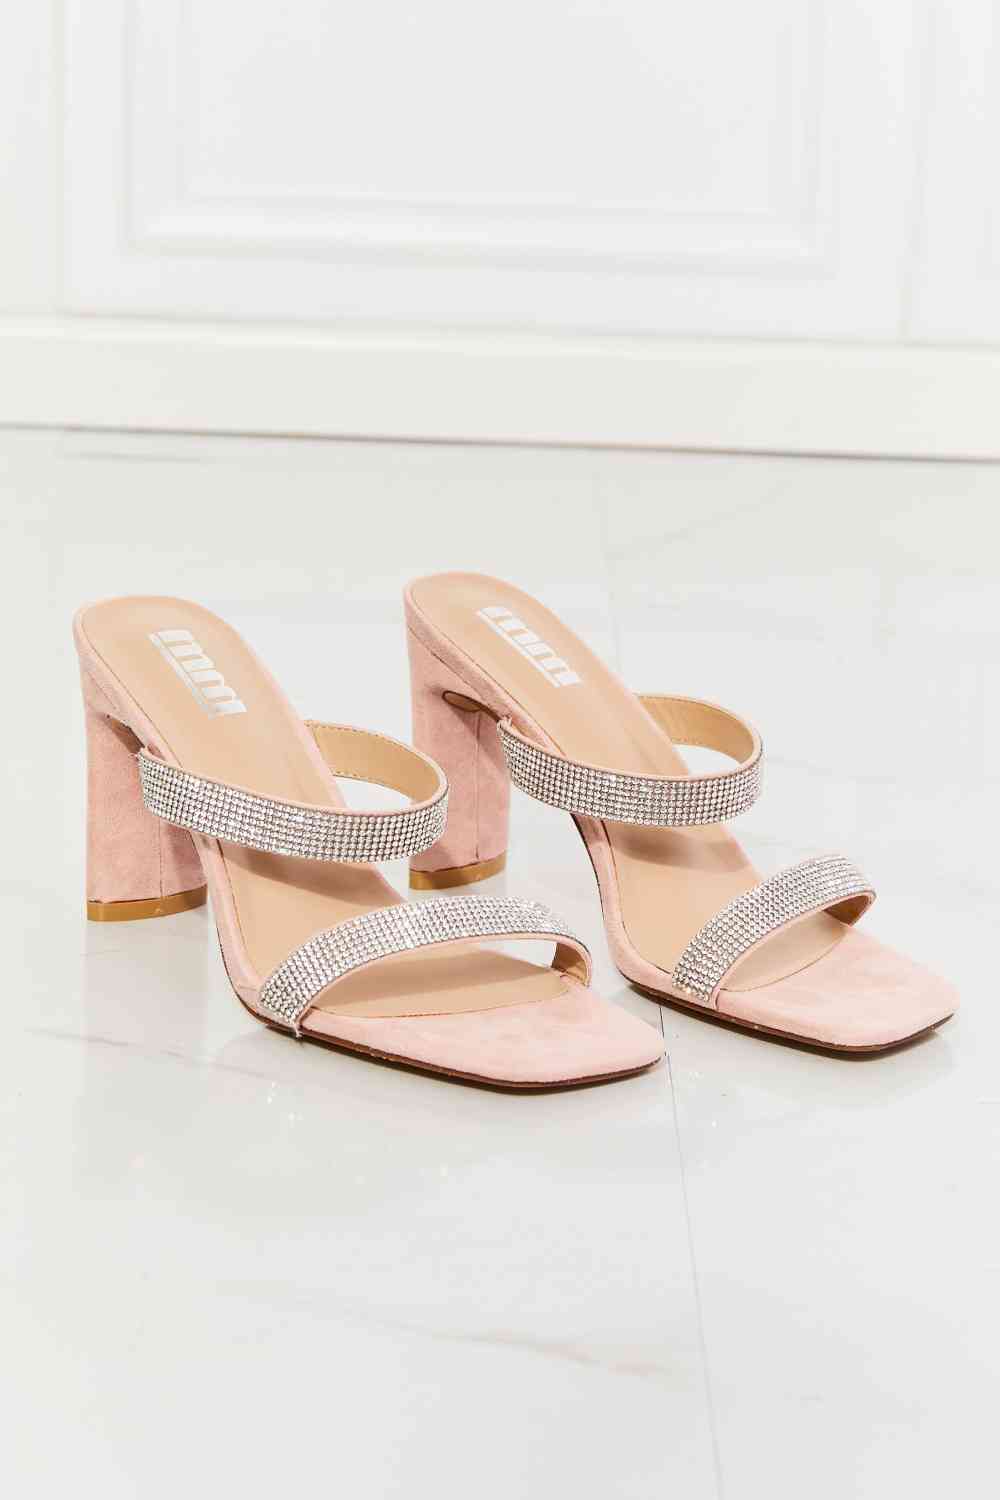 Leave A Little Sparkle Rhinestone Block Heel Sandal in Pink - Accessories - Shoes - 6 - 2024